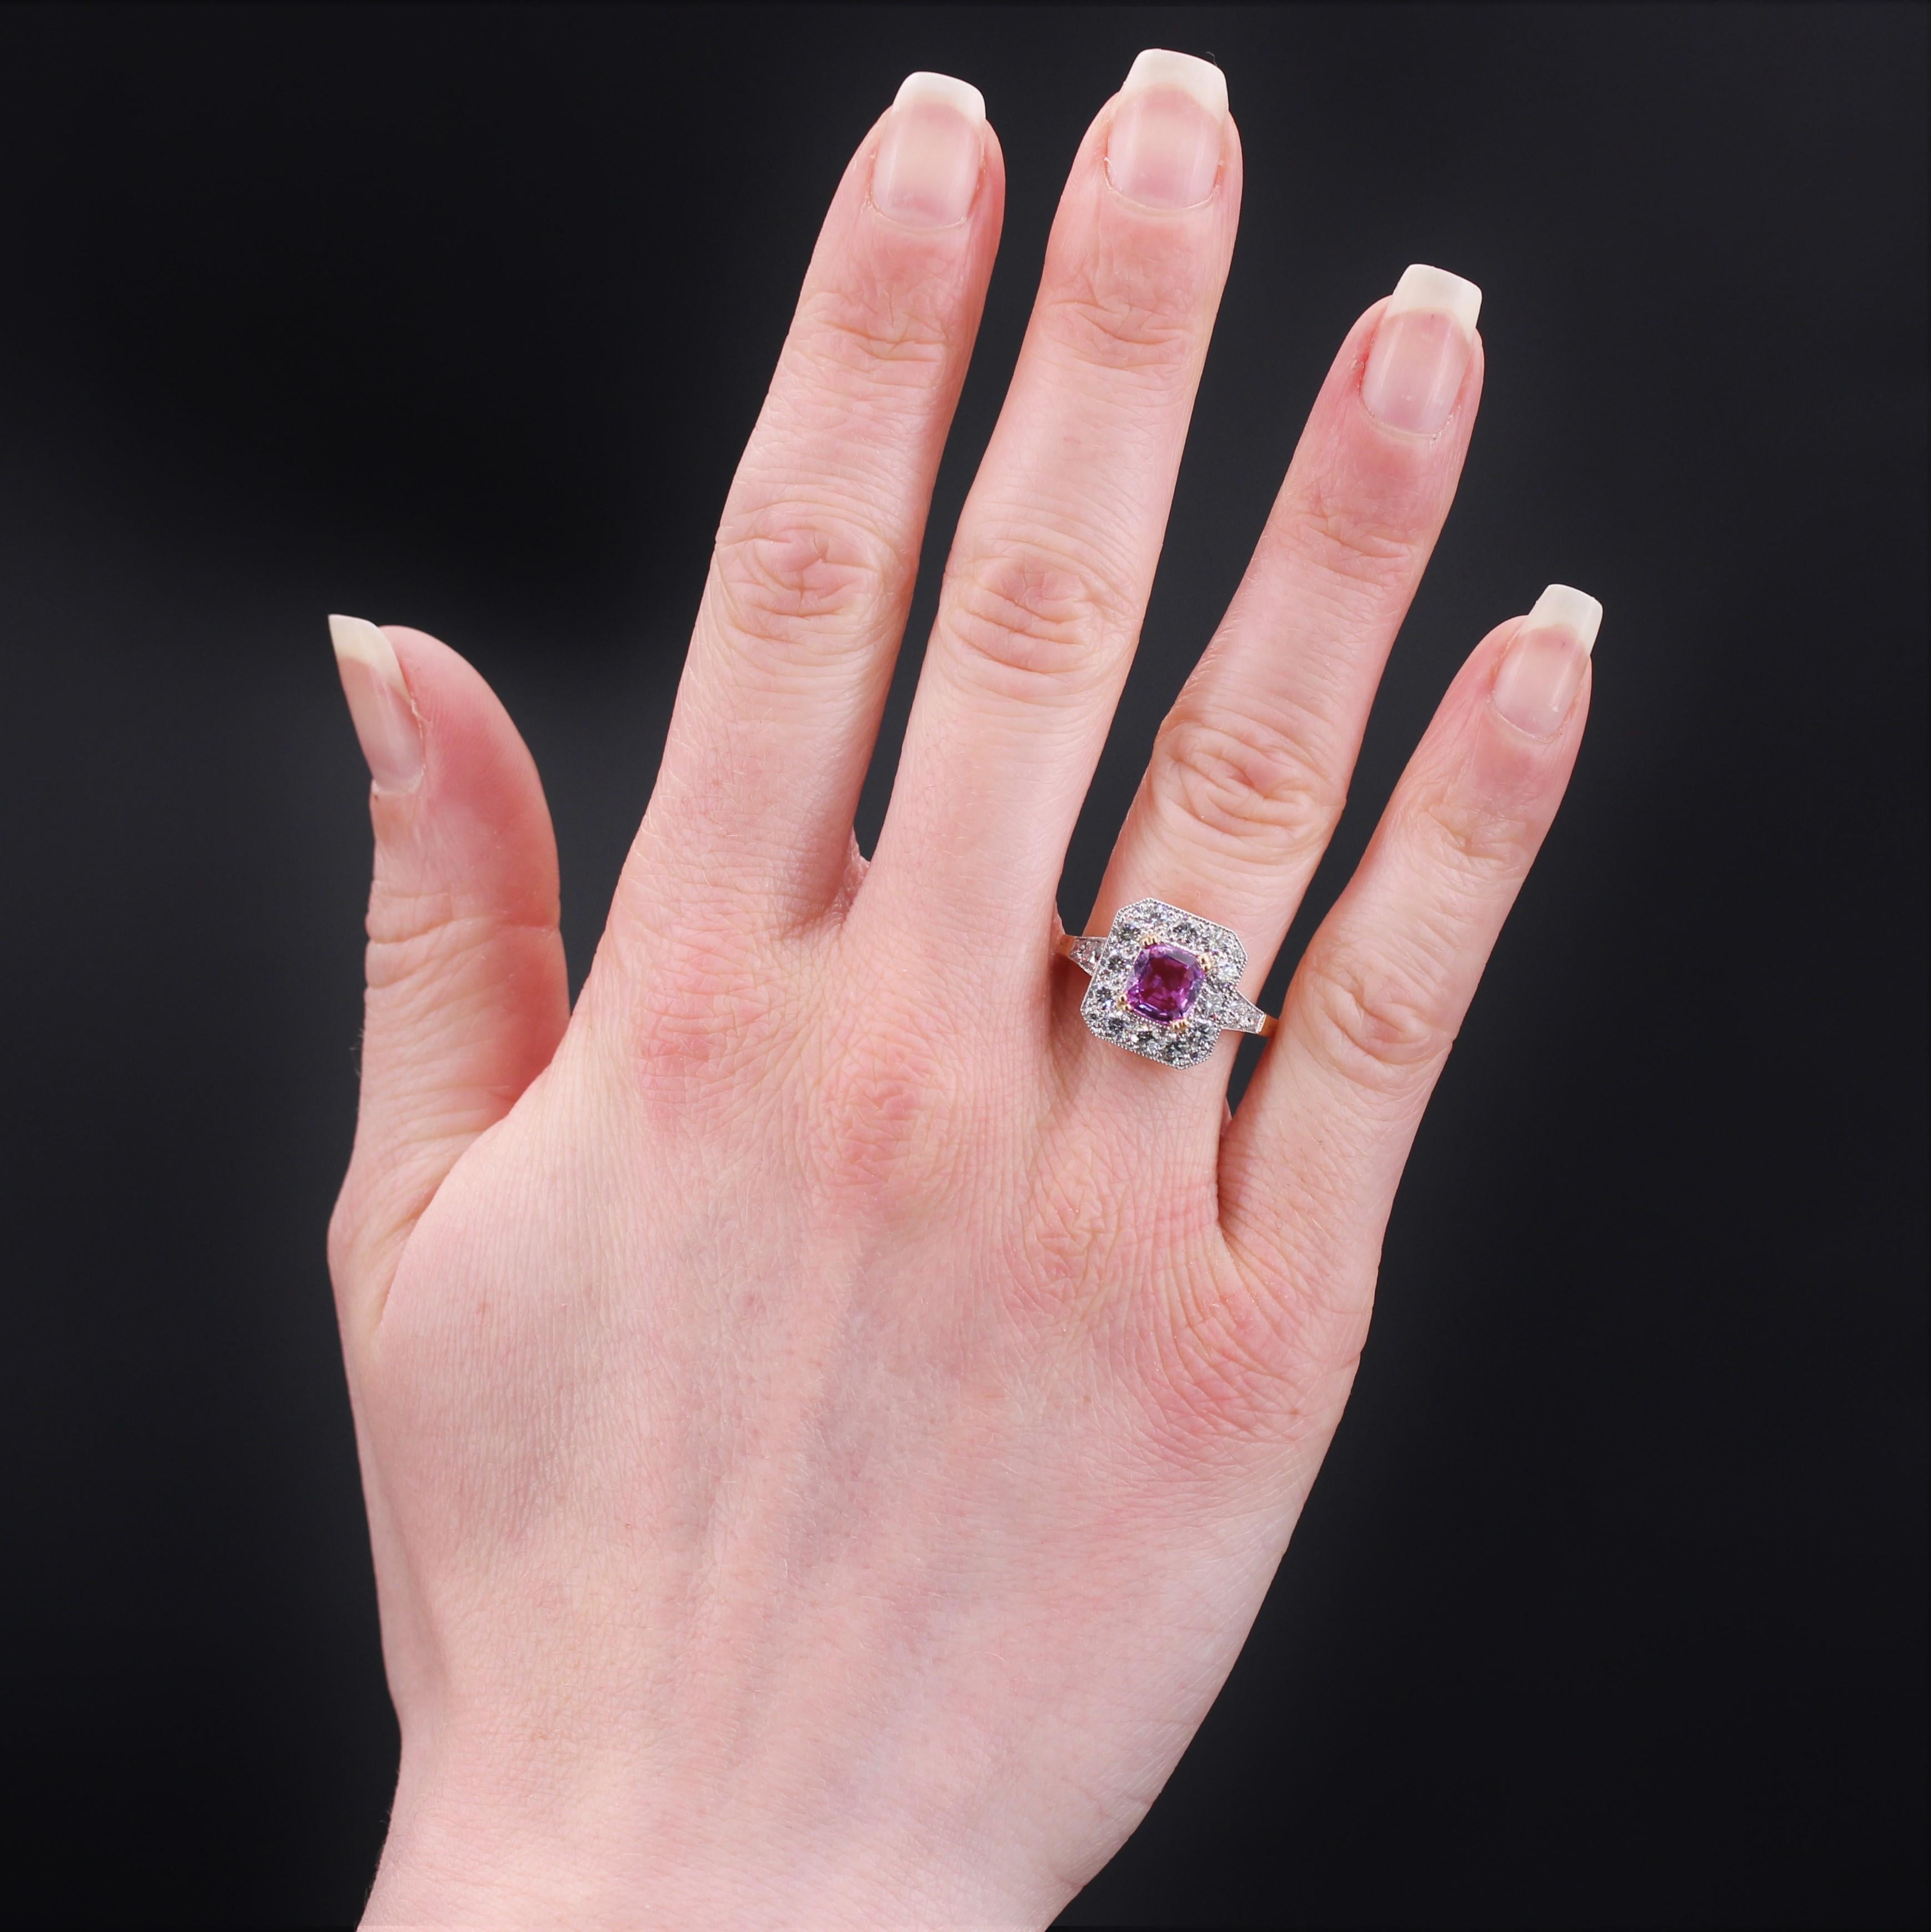 Ring in 18 karat yellow gold, eagle head hallmark and platinum, dog head hallmark.
Magnificent new ring whose mounting is inspired by art deco, it is decorated on its top with a pink cushion- cut sapphire retained with 2x4 claws.
The top is adorned